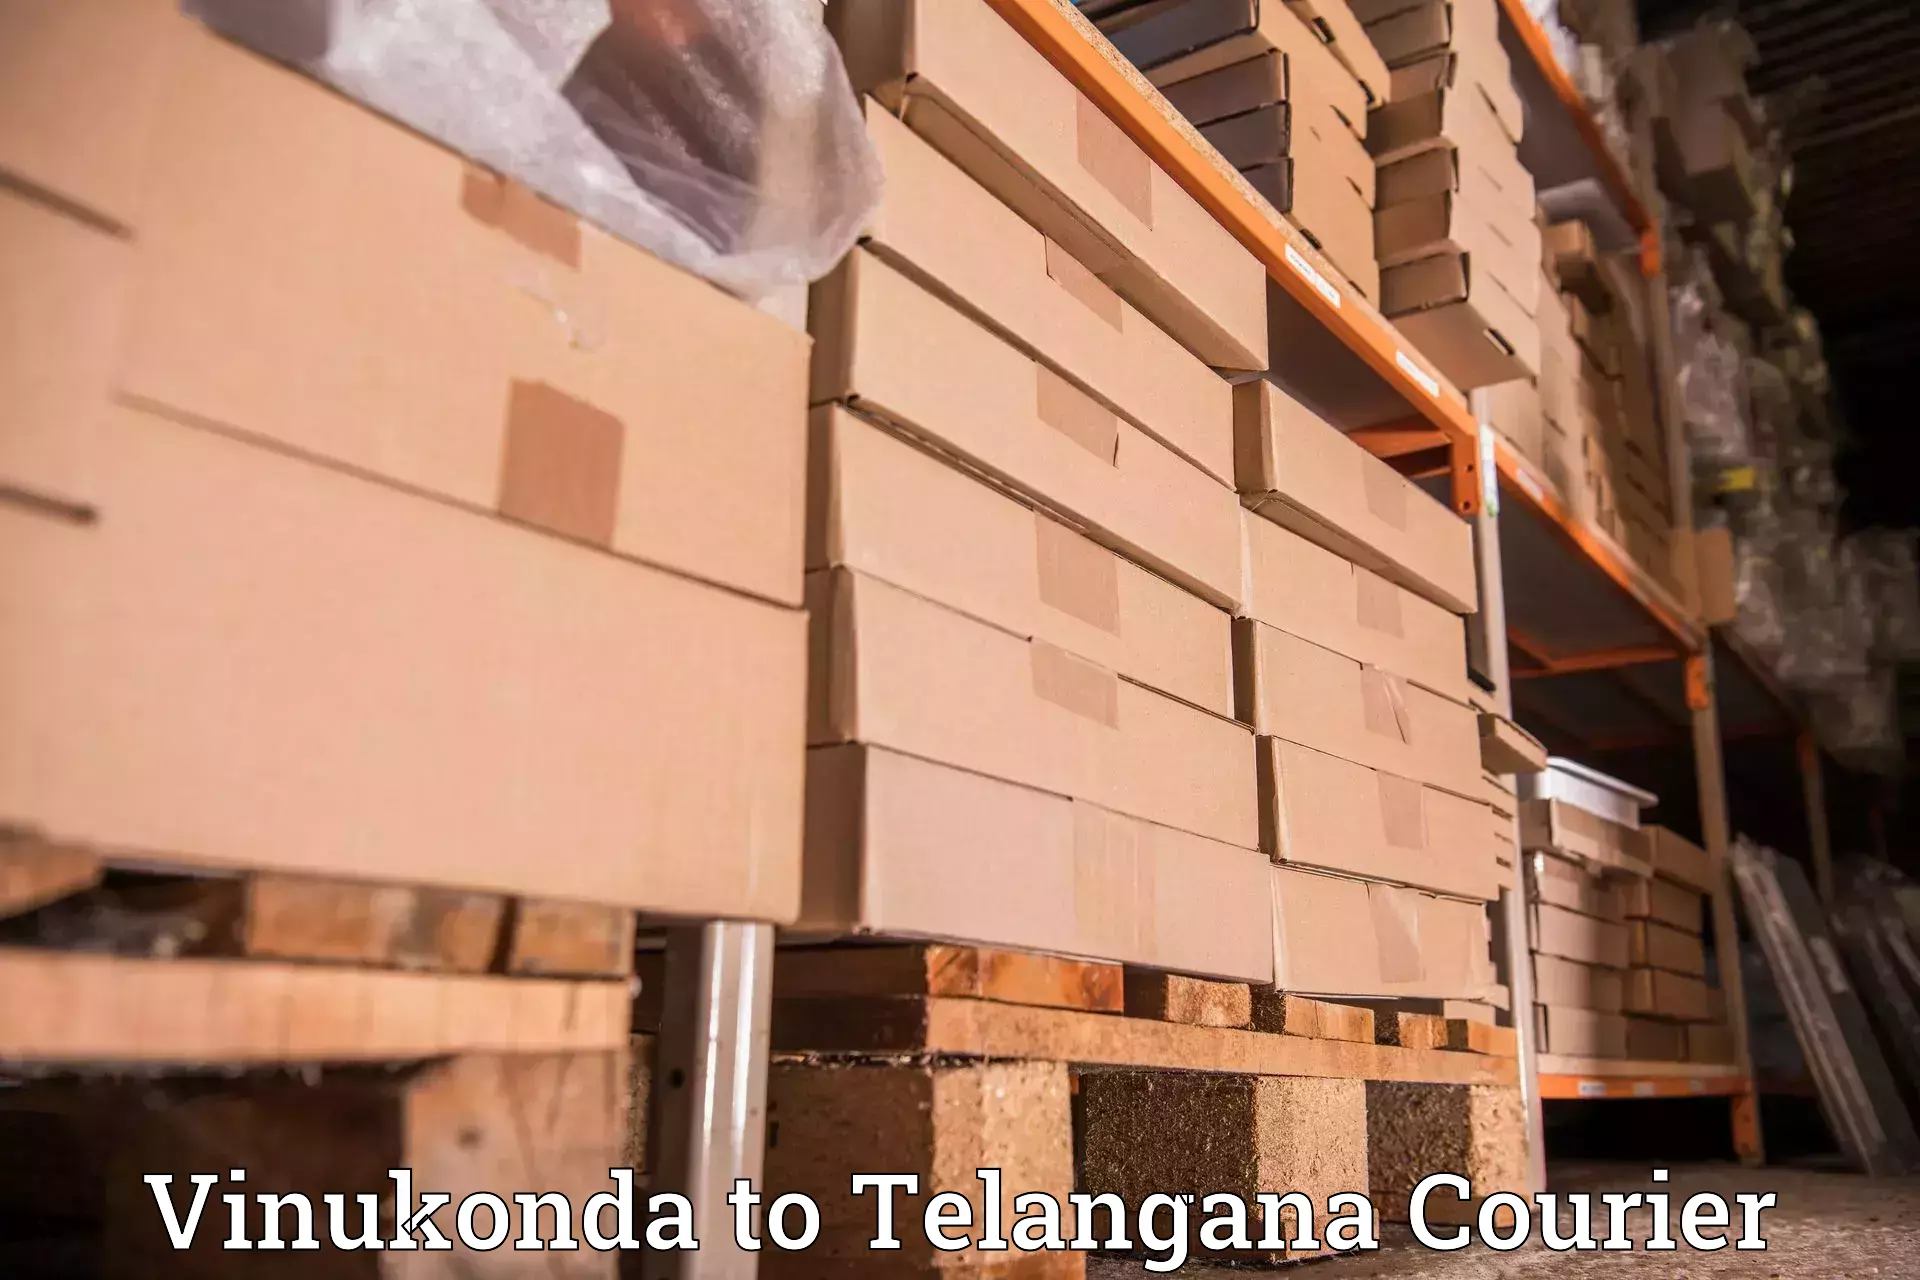 End-to-end delivery Vinukonda to Telangana